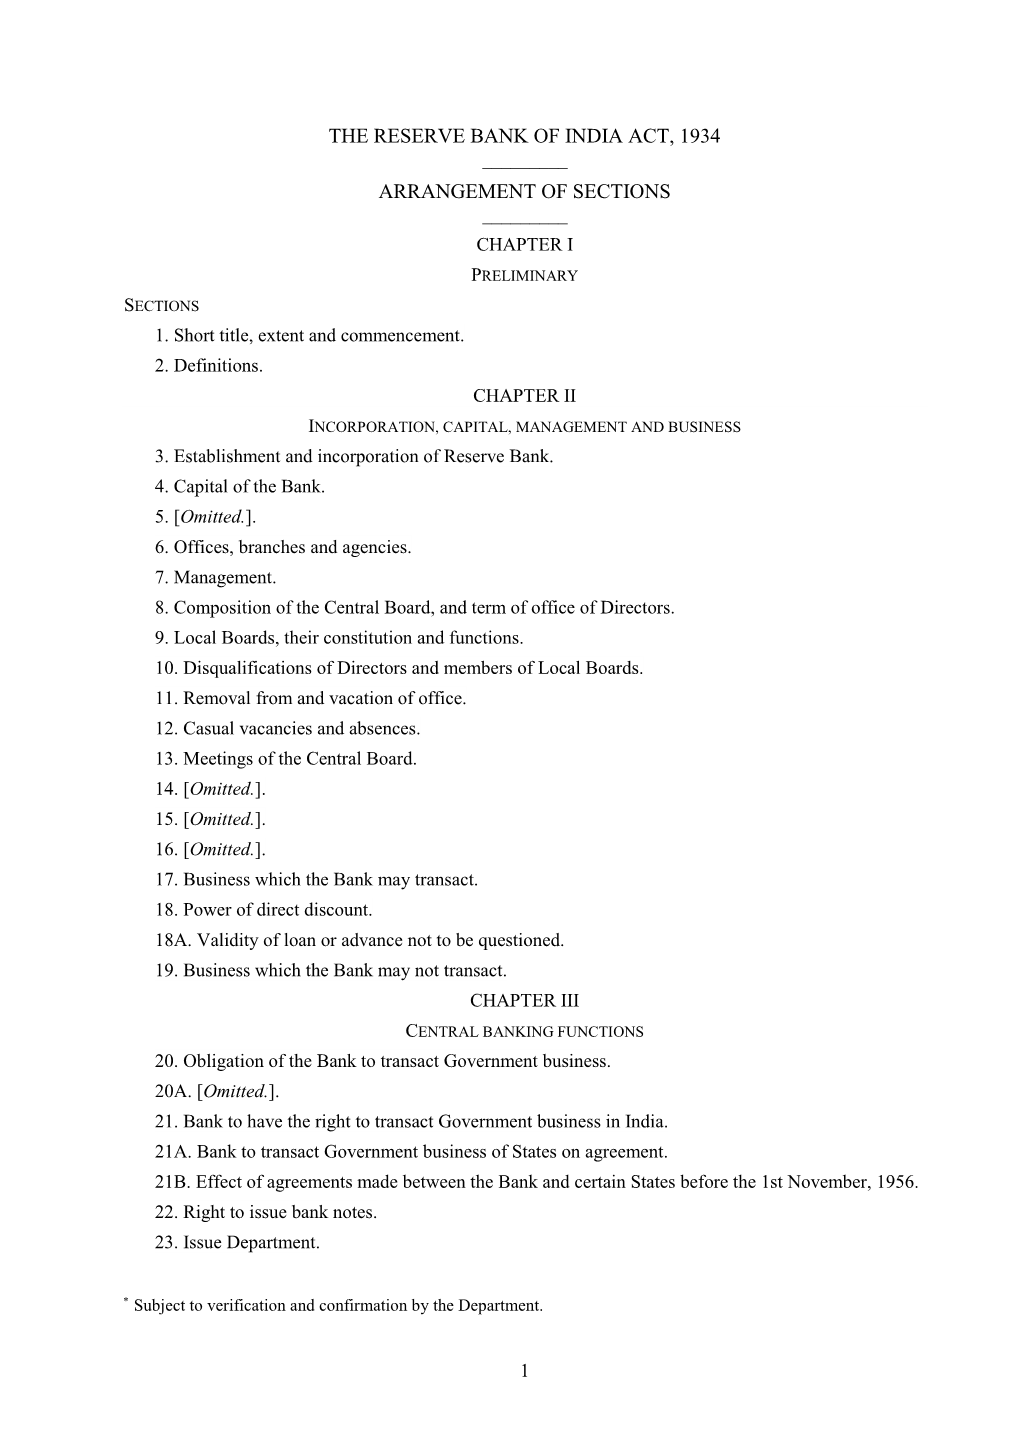 The Reserve Bank of India Act, 1934 Arrangement of Sections